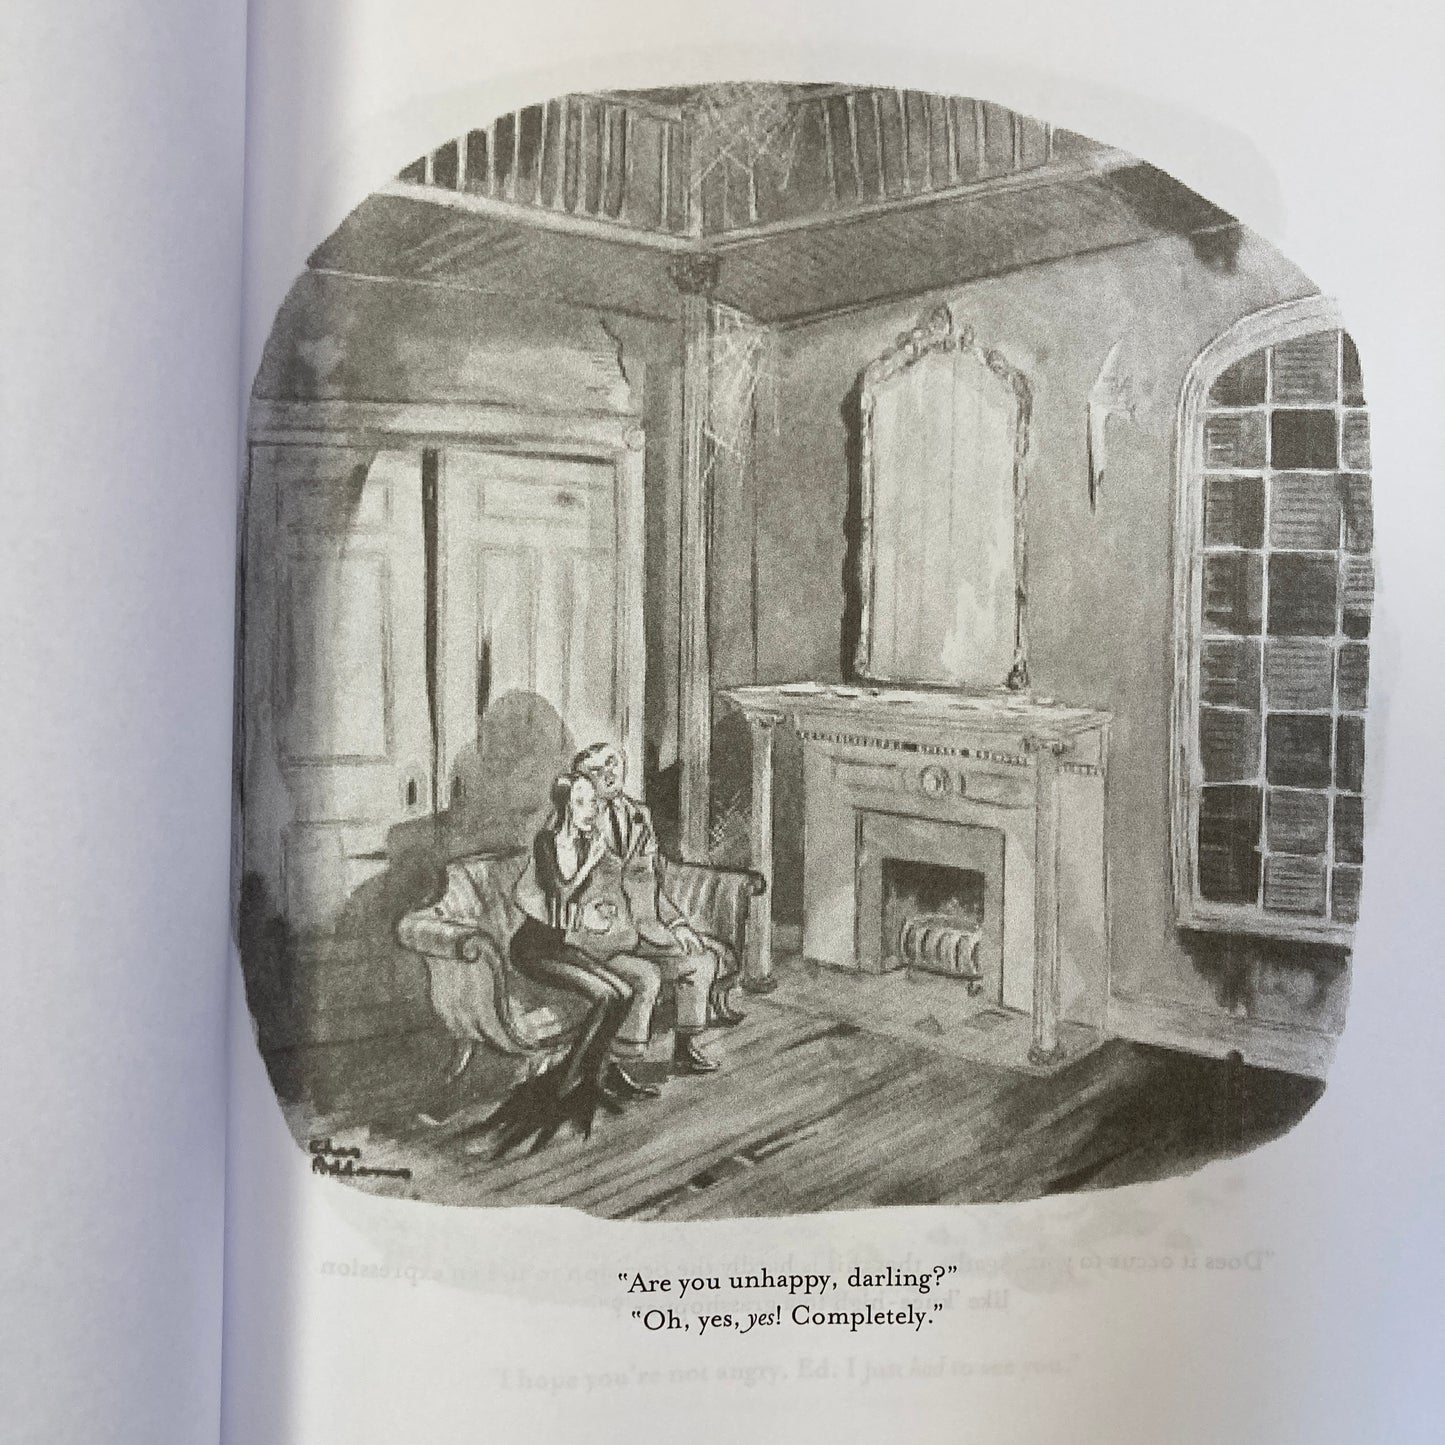 Chas Addams: Happily Ever After